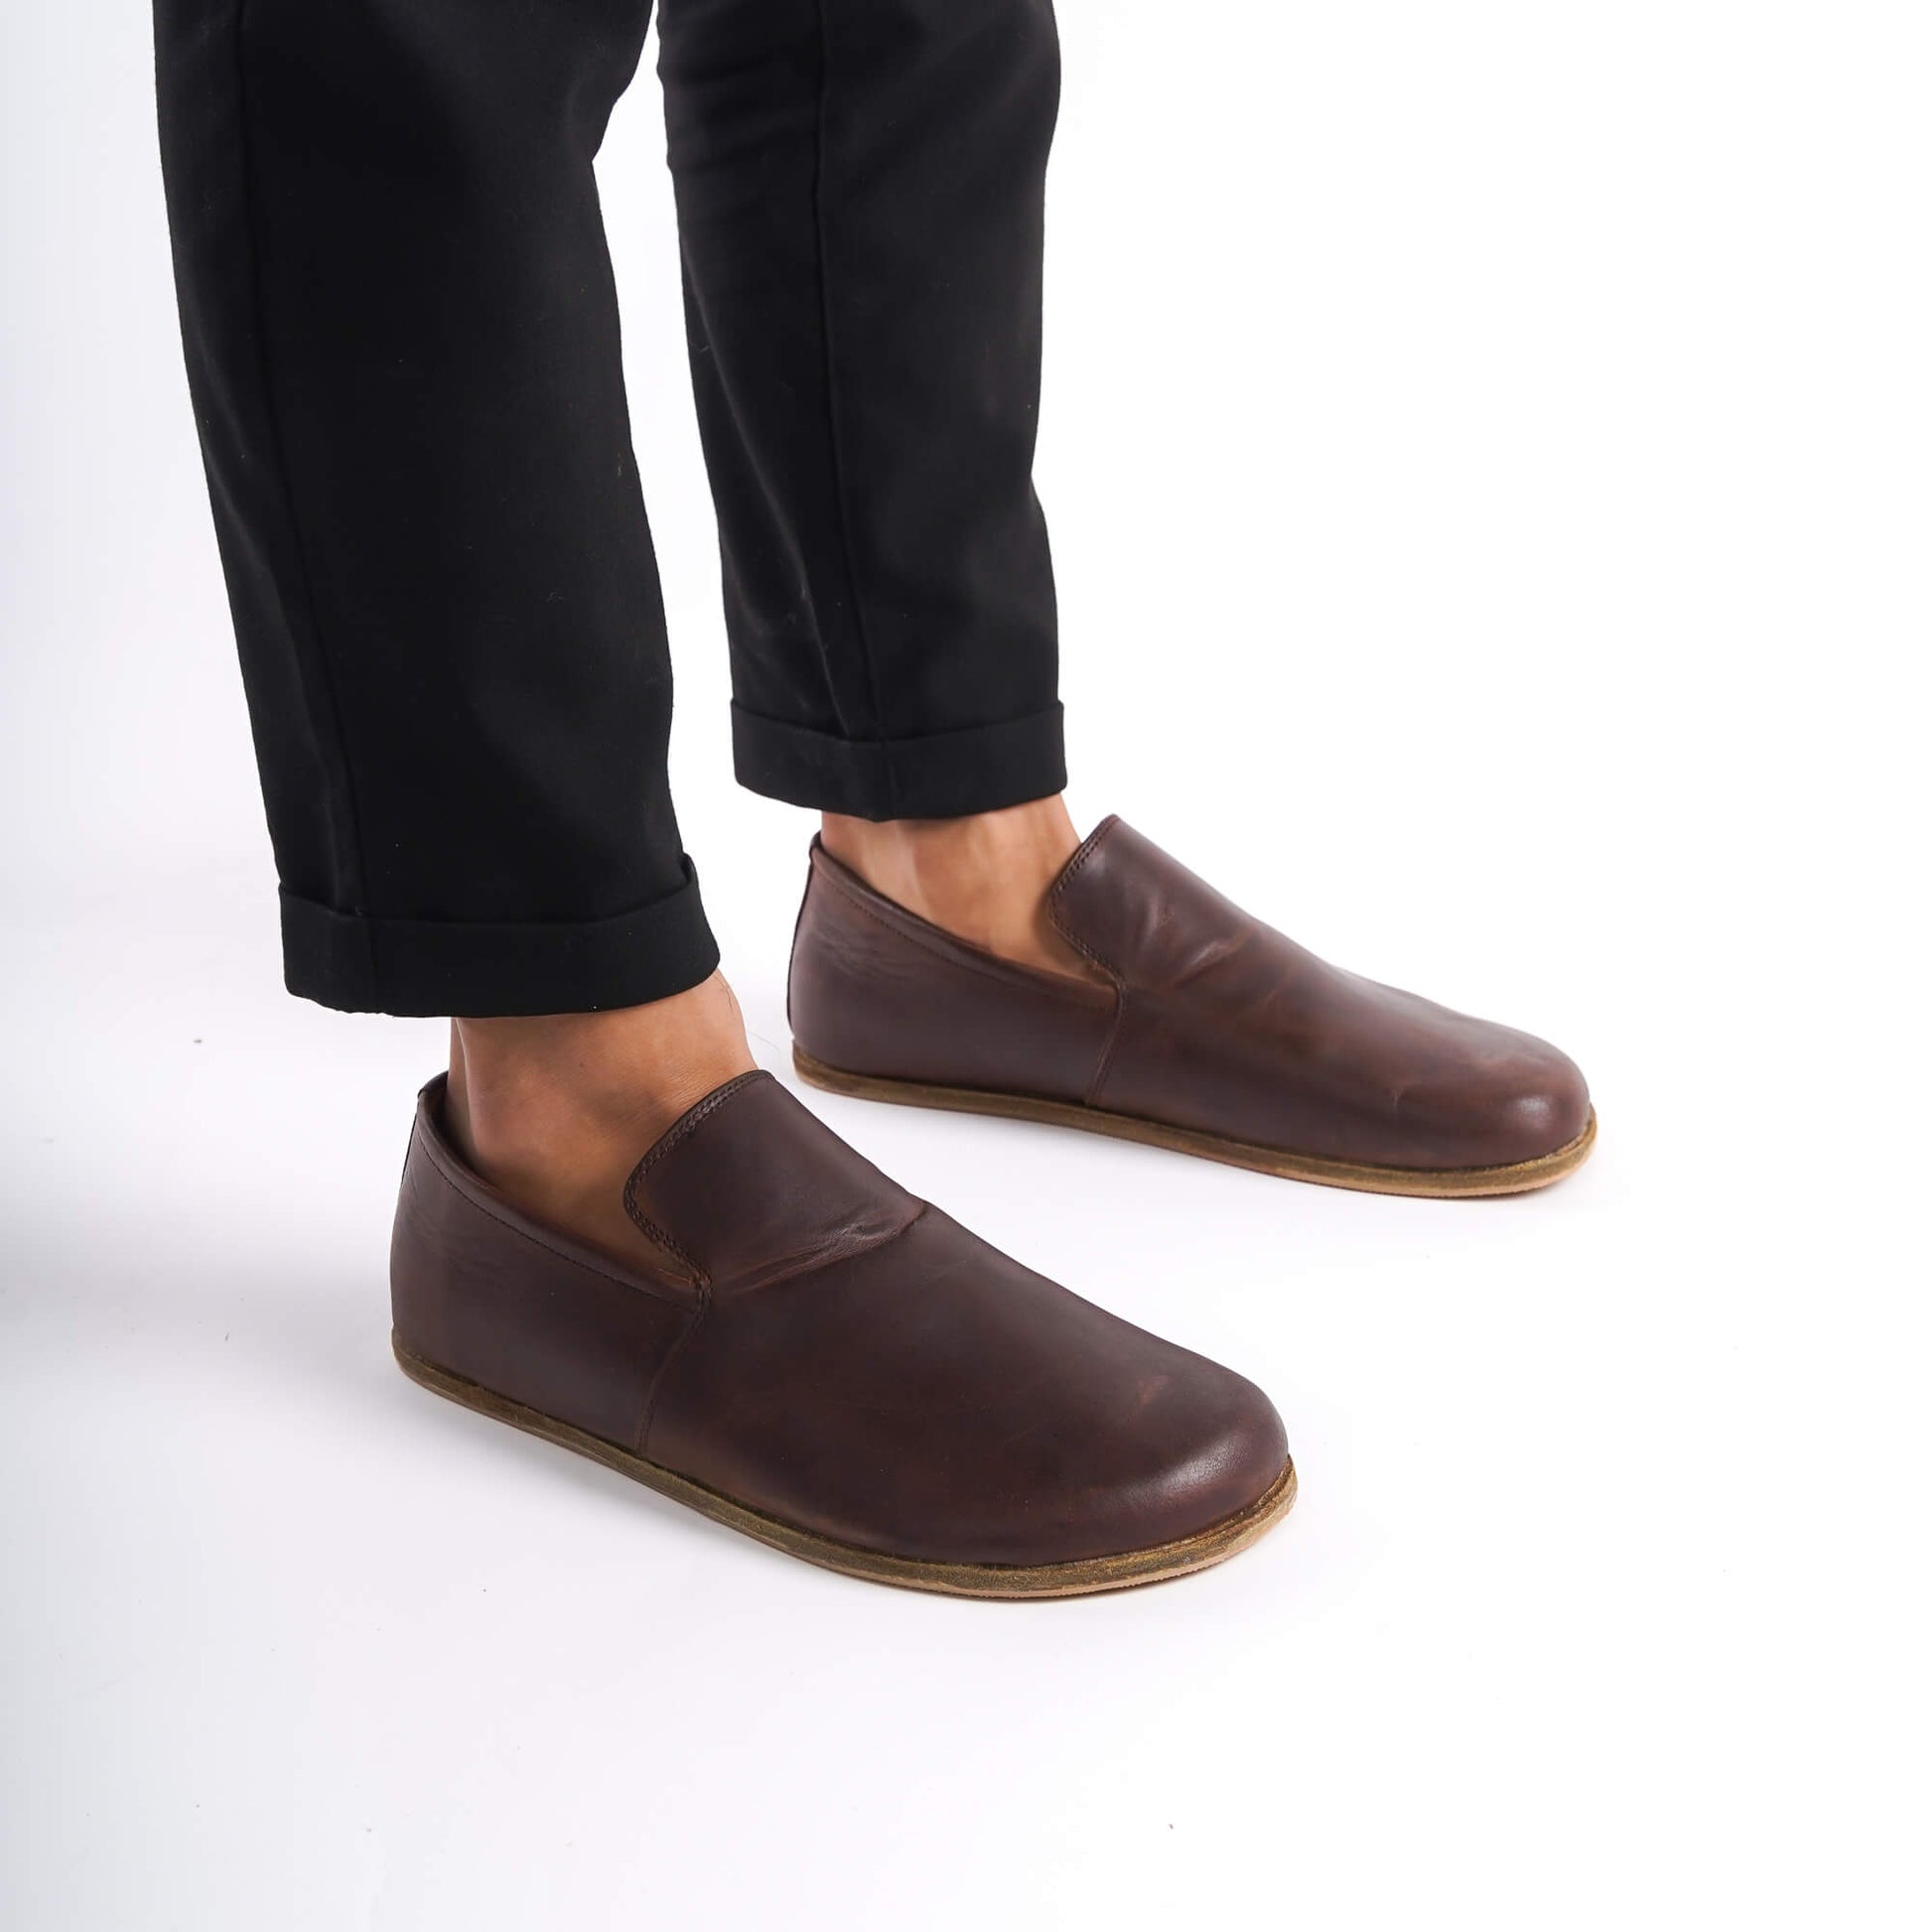 Brown leather barefoot men's loafers with natural fit, Aeolia design. Experience comfort at pelanir.com!